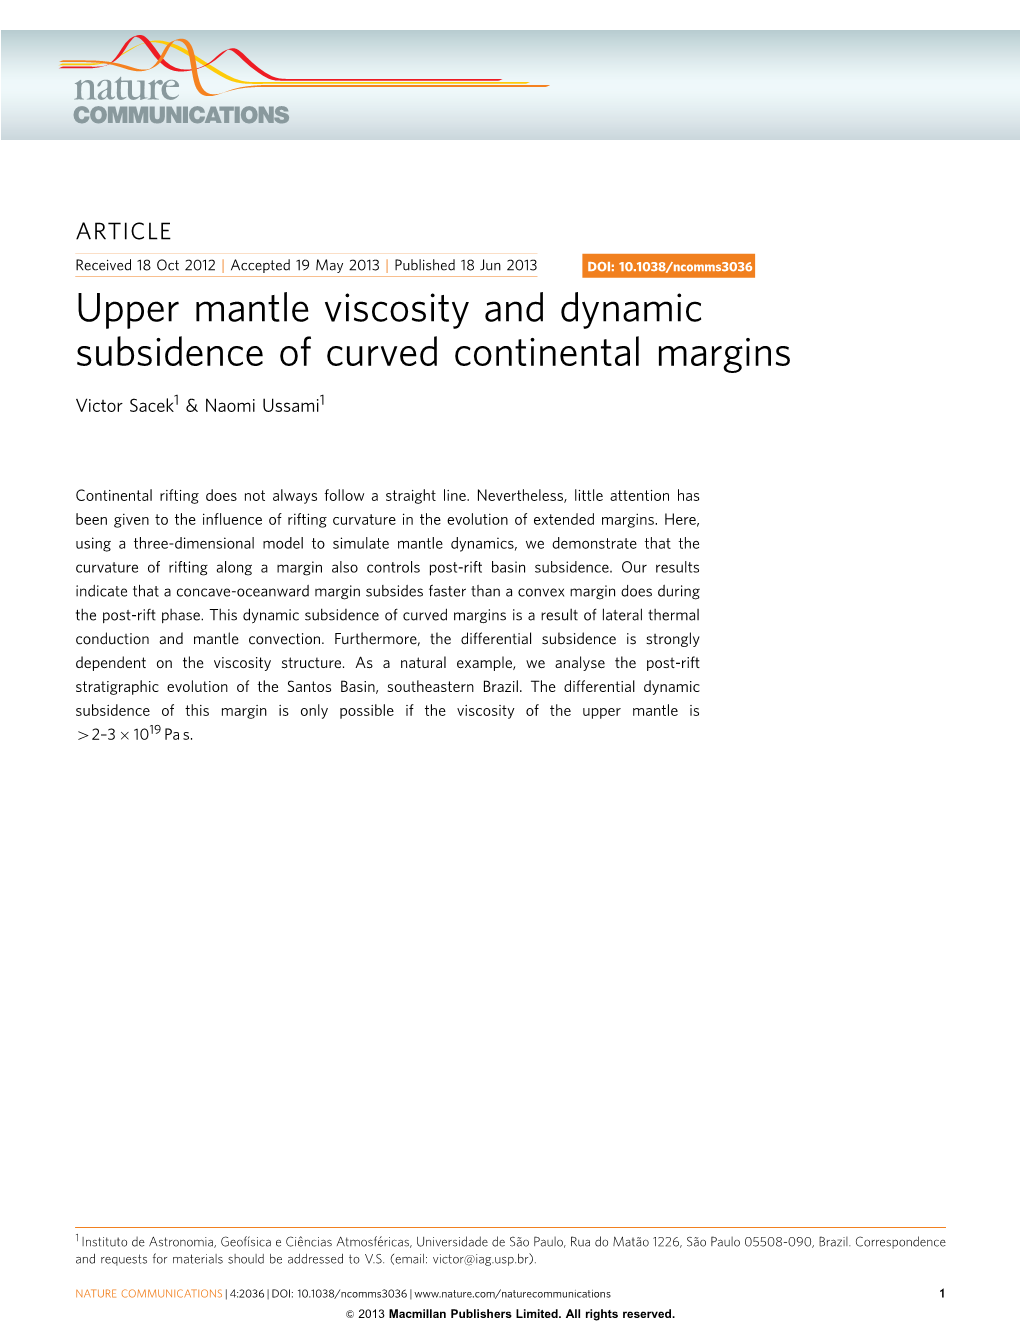 Upper Mantle Viscosity and Dynamic Subsidence of Curved Continental Margins